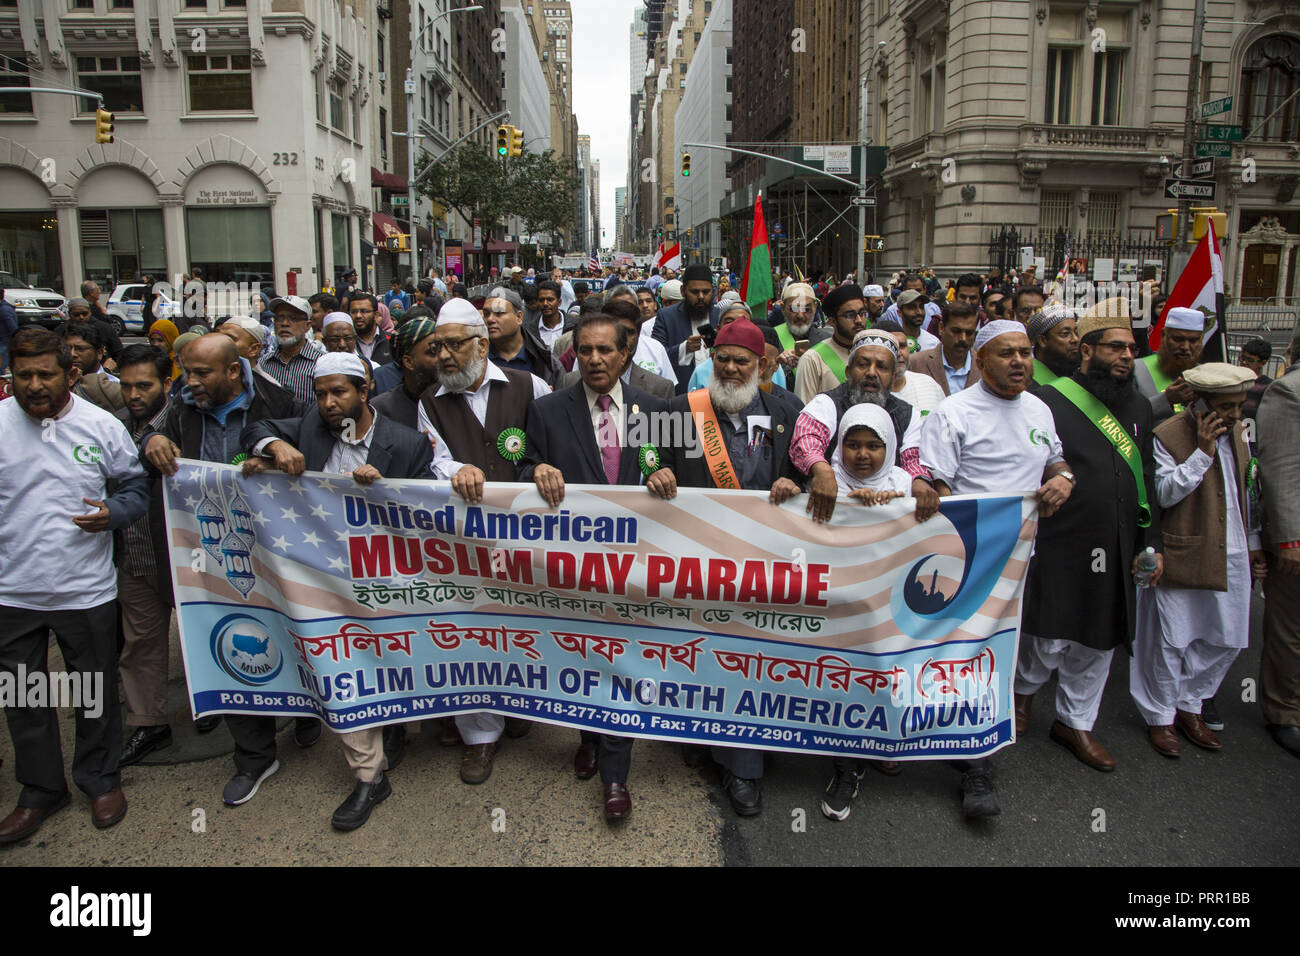 Grand Marshal and other dignitaries carry the official banner in the American Muslim Day Parade on Madison Avenue in New York City. Stock Photo